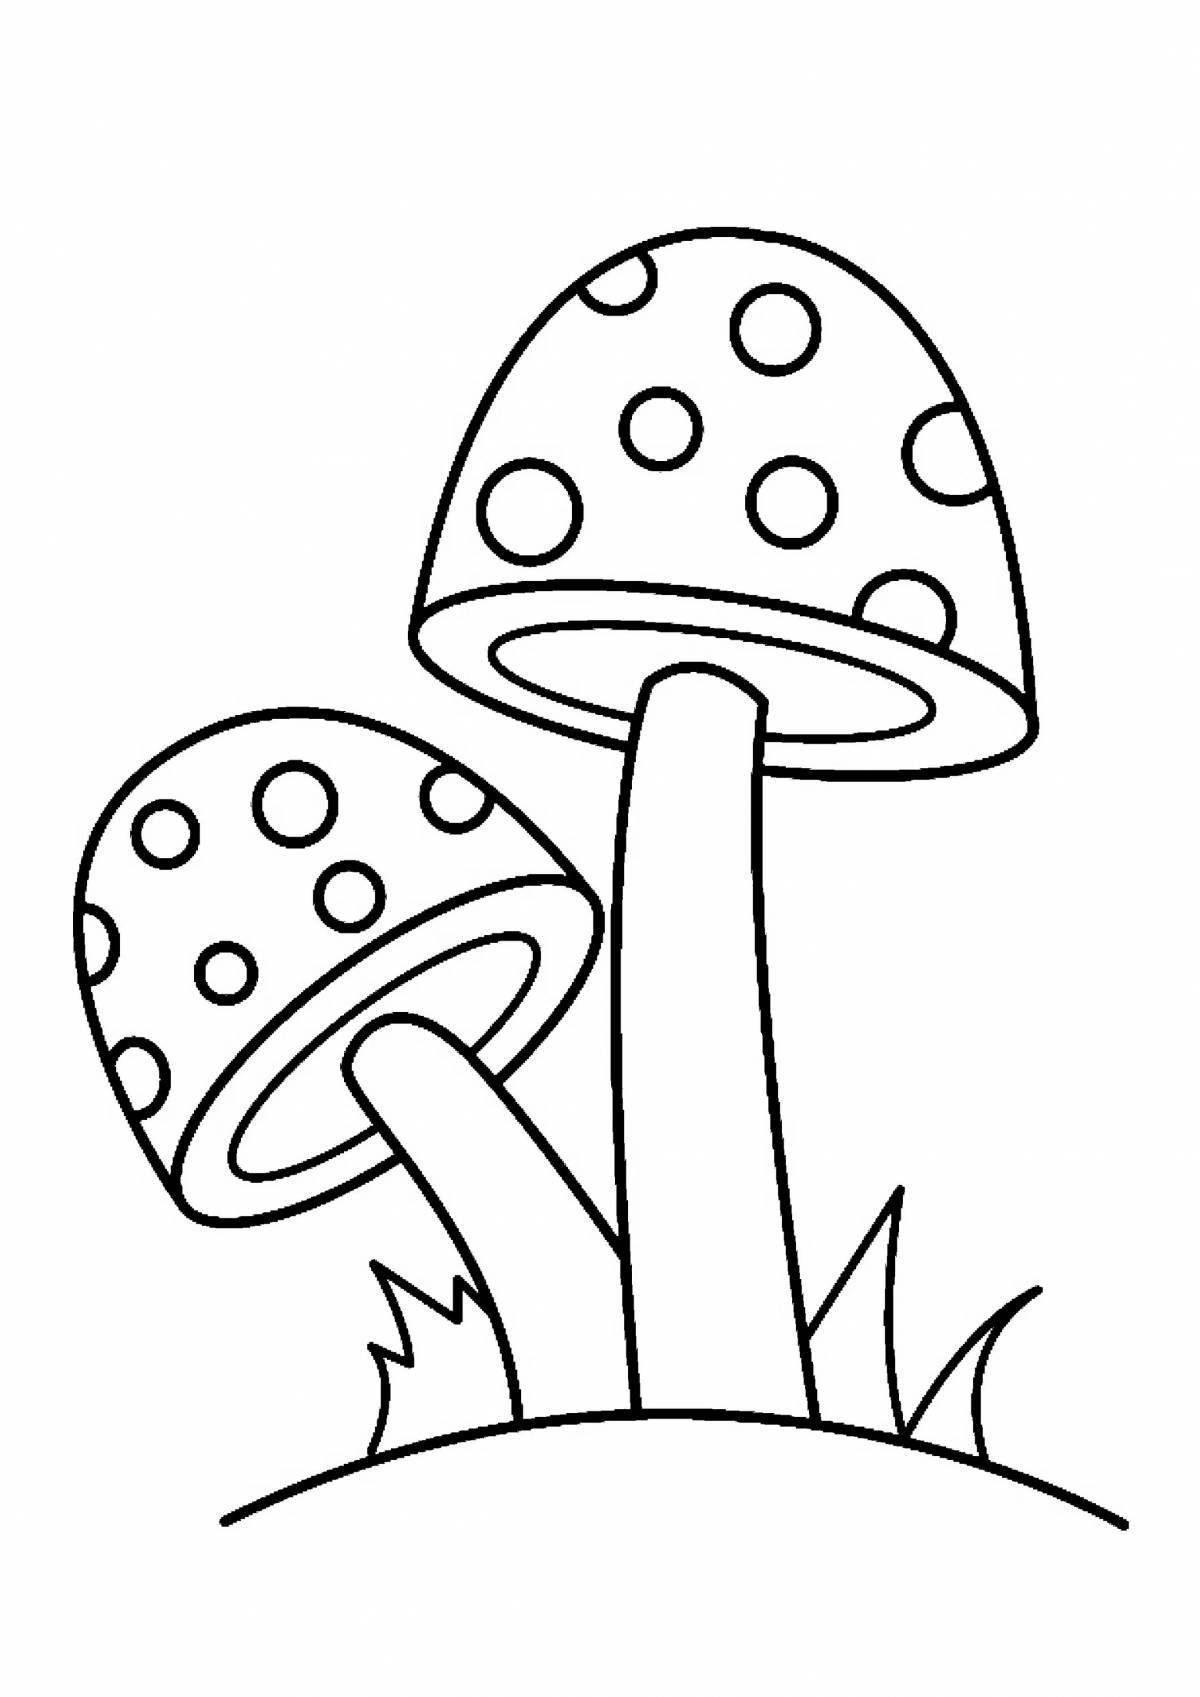 Cute fly agaric coloring book for kids